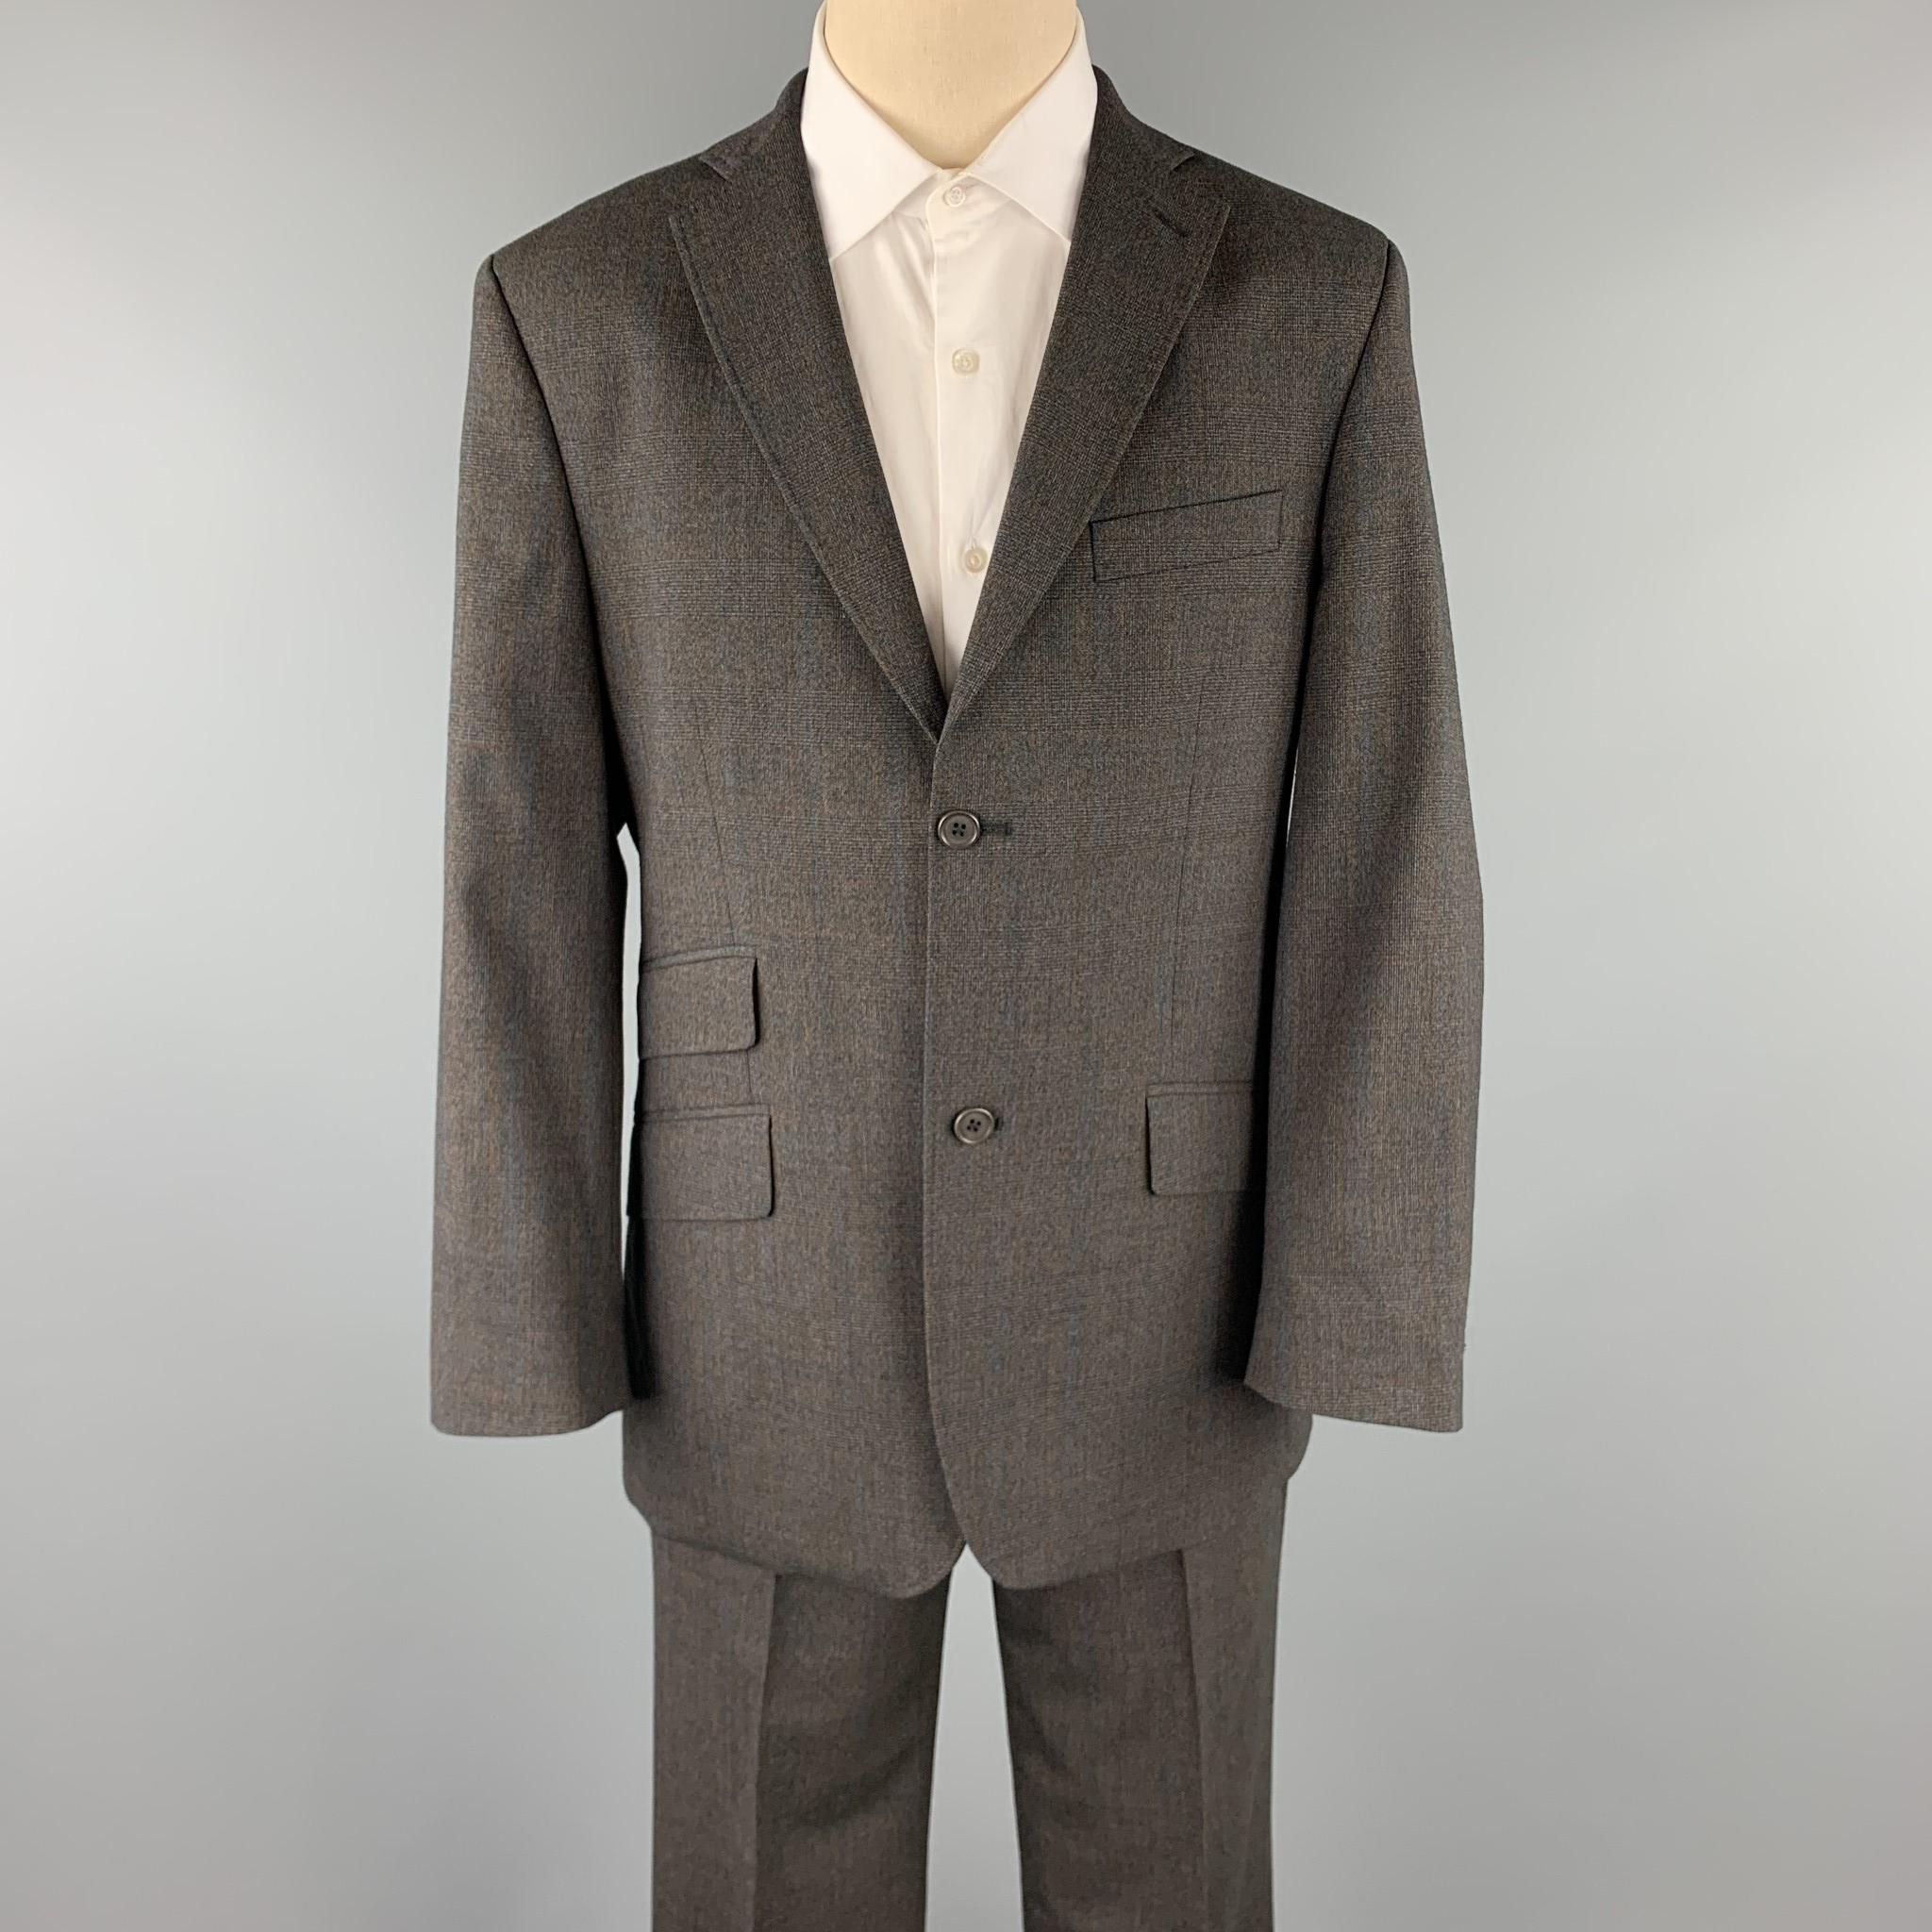 TED BAKER suit comes in a charcoal glenplaid wool with a full purple iridescent liner and includes a single breasted, two button sport coat with a notch lapel and matching flat front trousers. 

Excellent Pre-Owned Condition.
Marked: 40